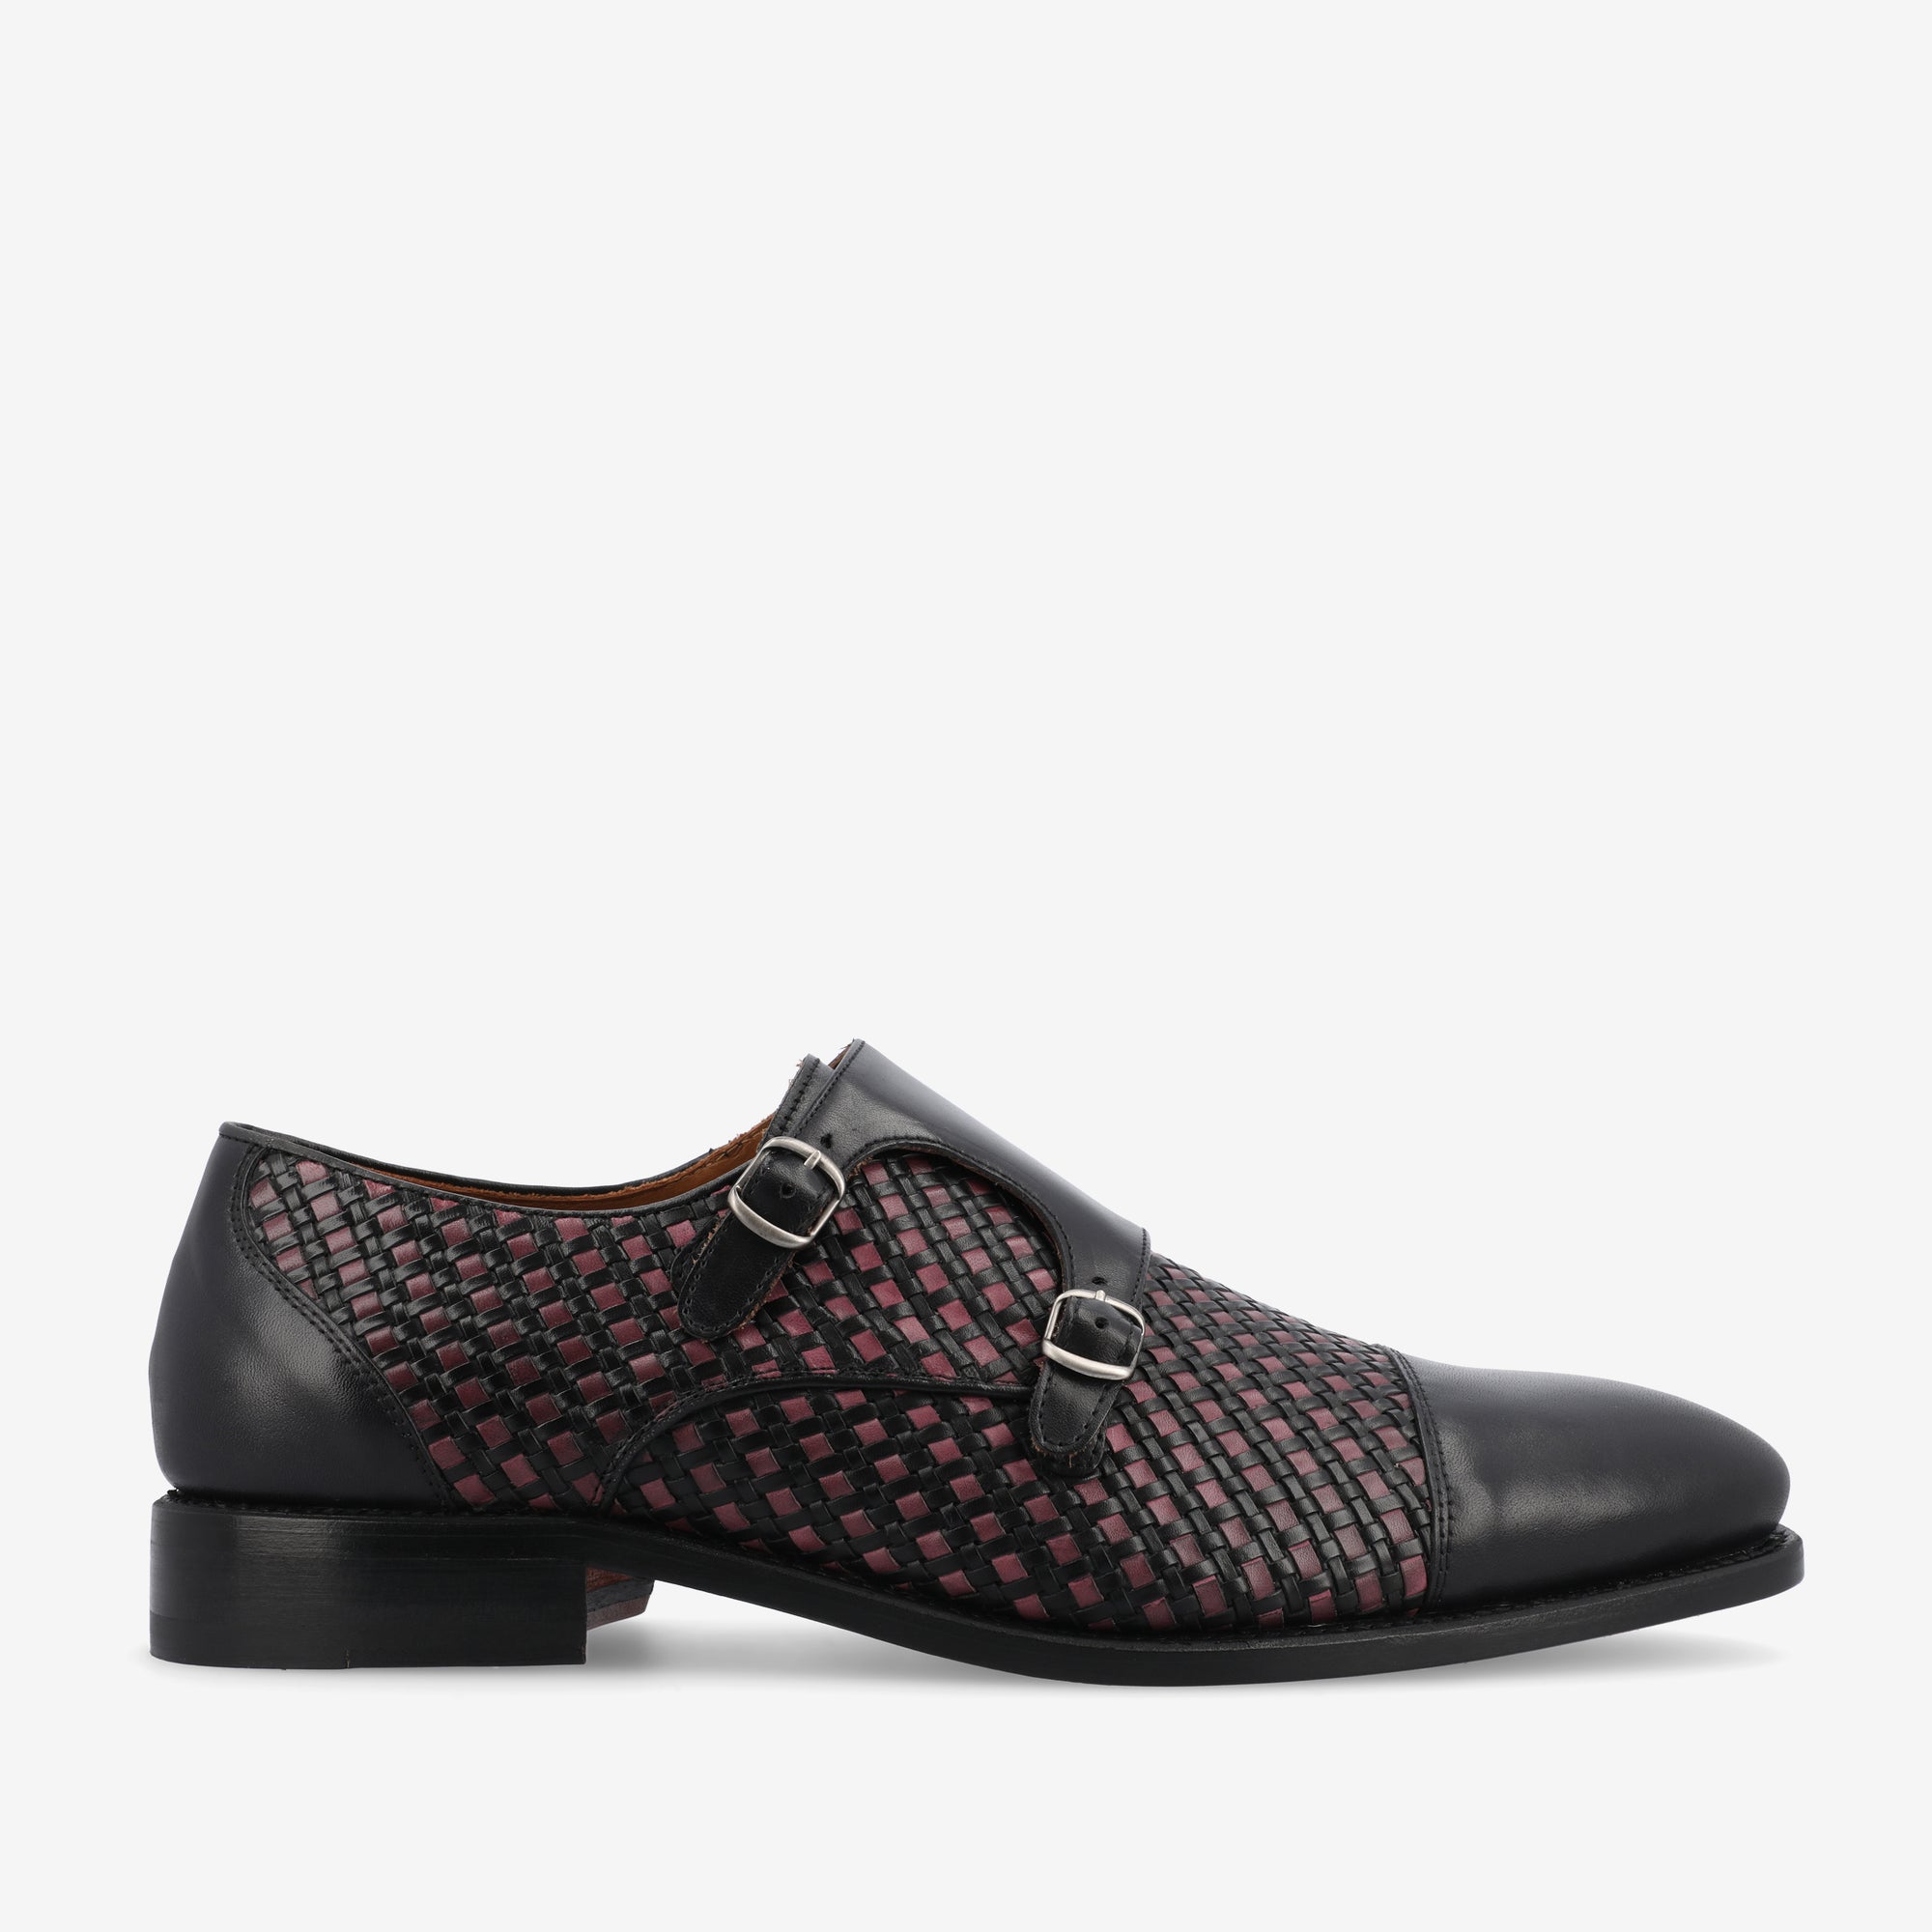 The Lucca Monk Woven in Black